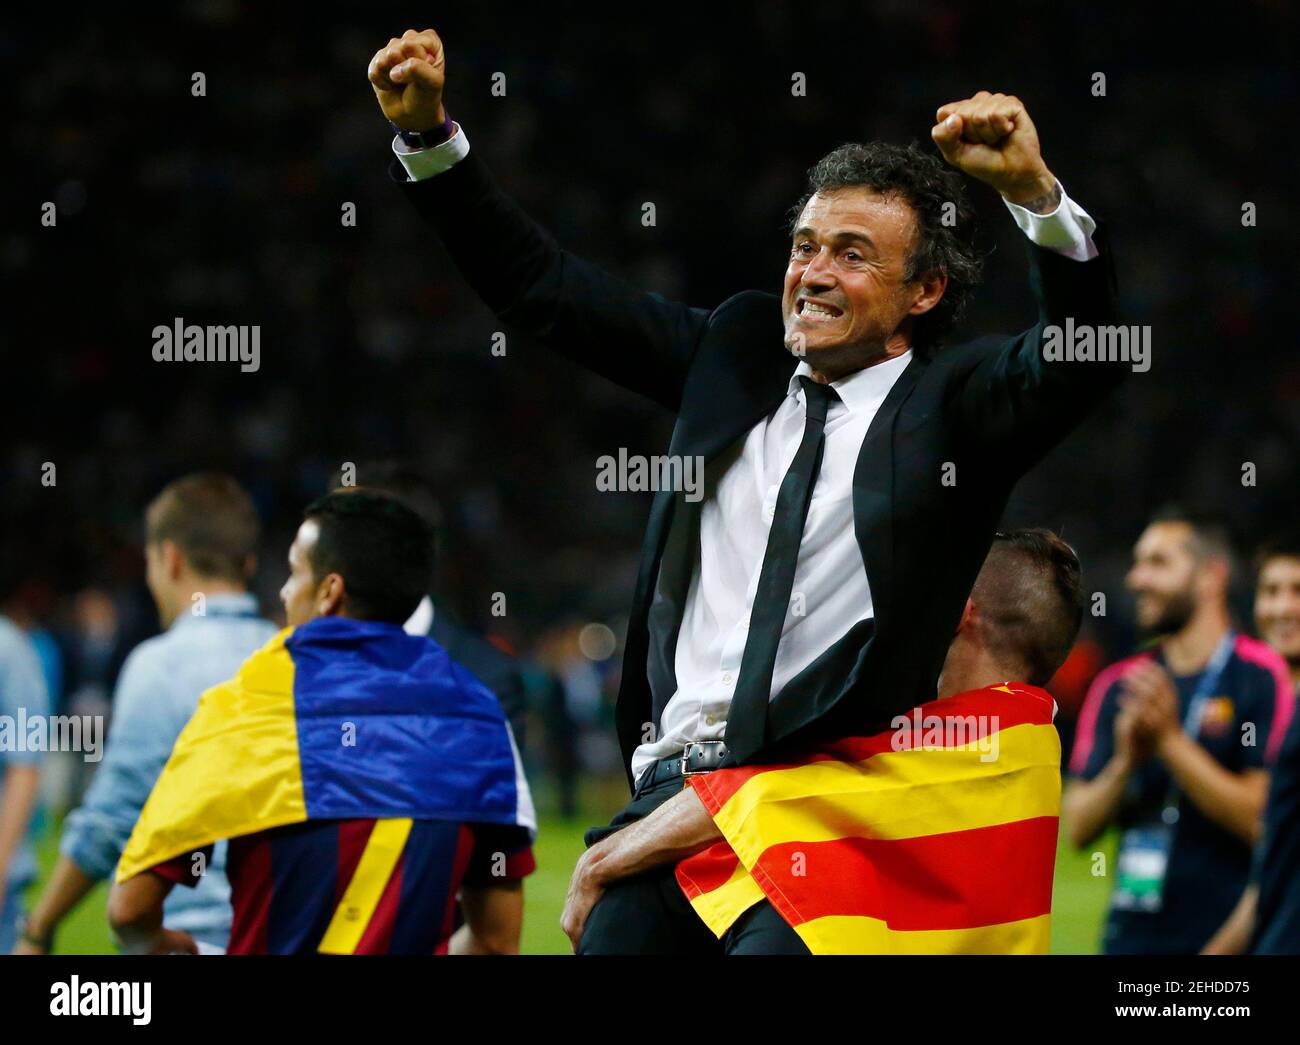 Football - FC Barcelona v Juventus - UEFA Champions League Final - Olympiastadion, Berlin, Germany - 6/6/15  Barcelona coach Luis Enrique celebrates at the end of the game  Reuters / Michael Dalder Stock Photo